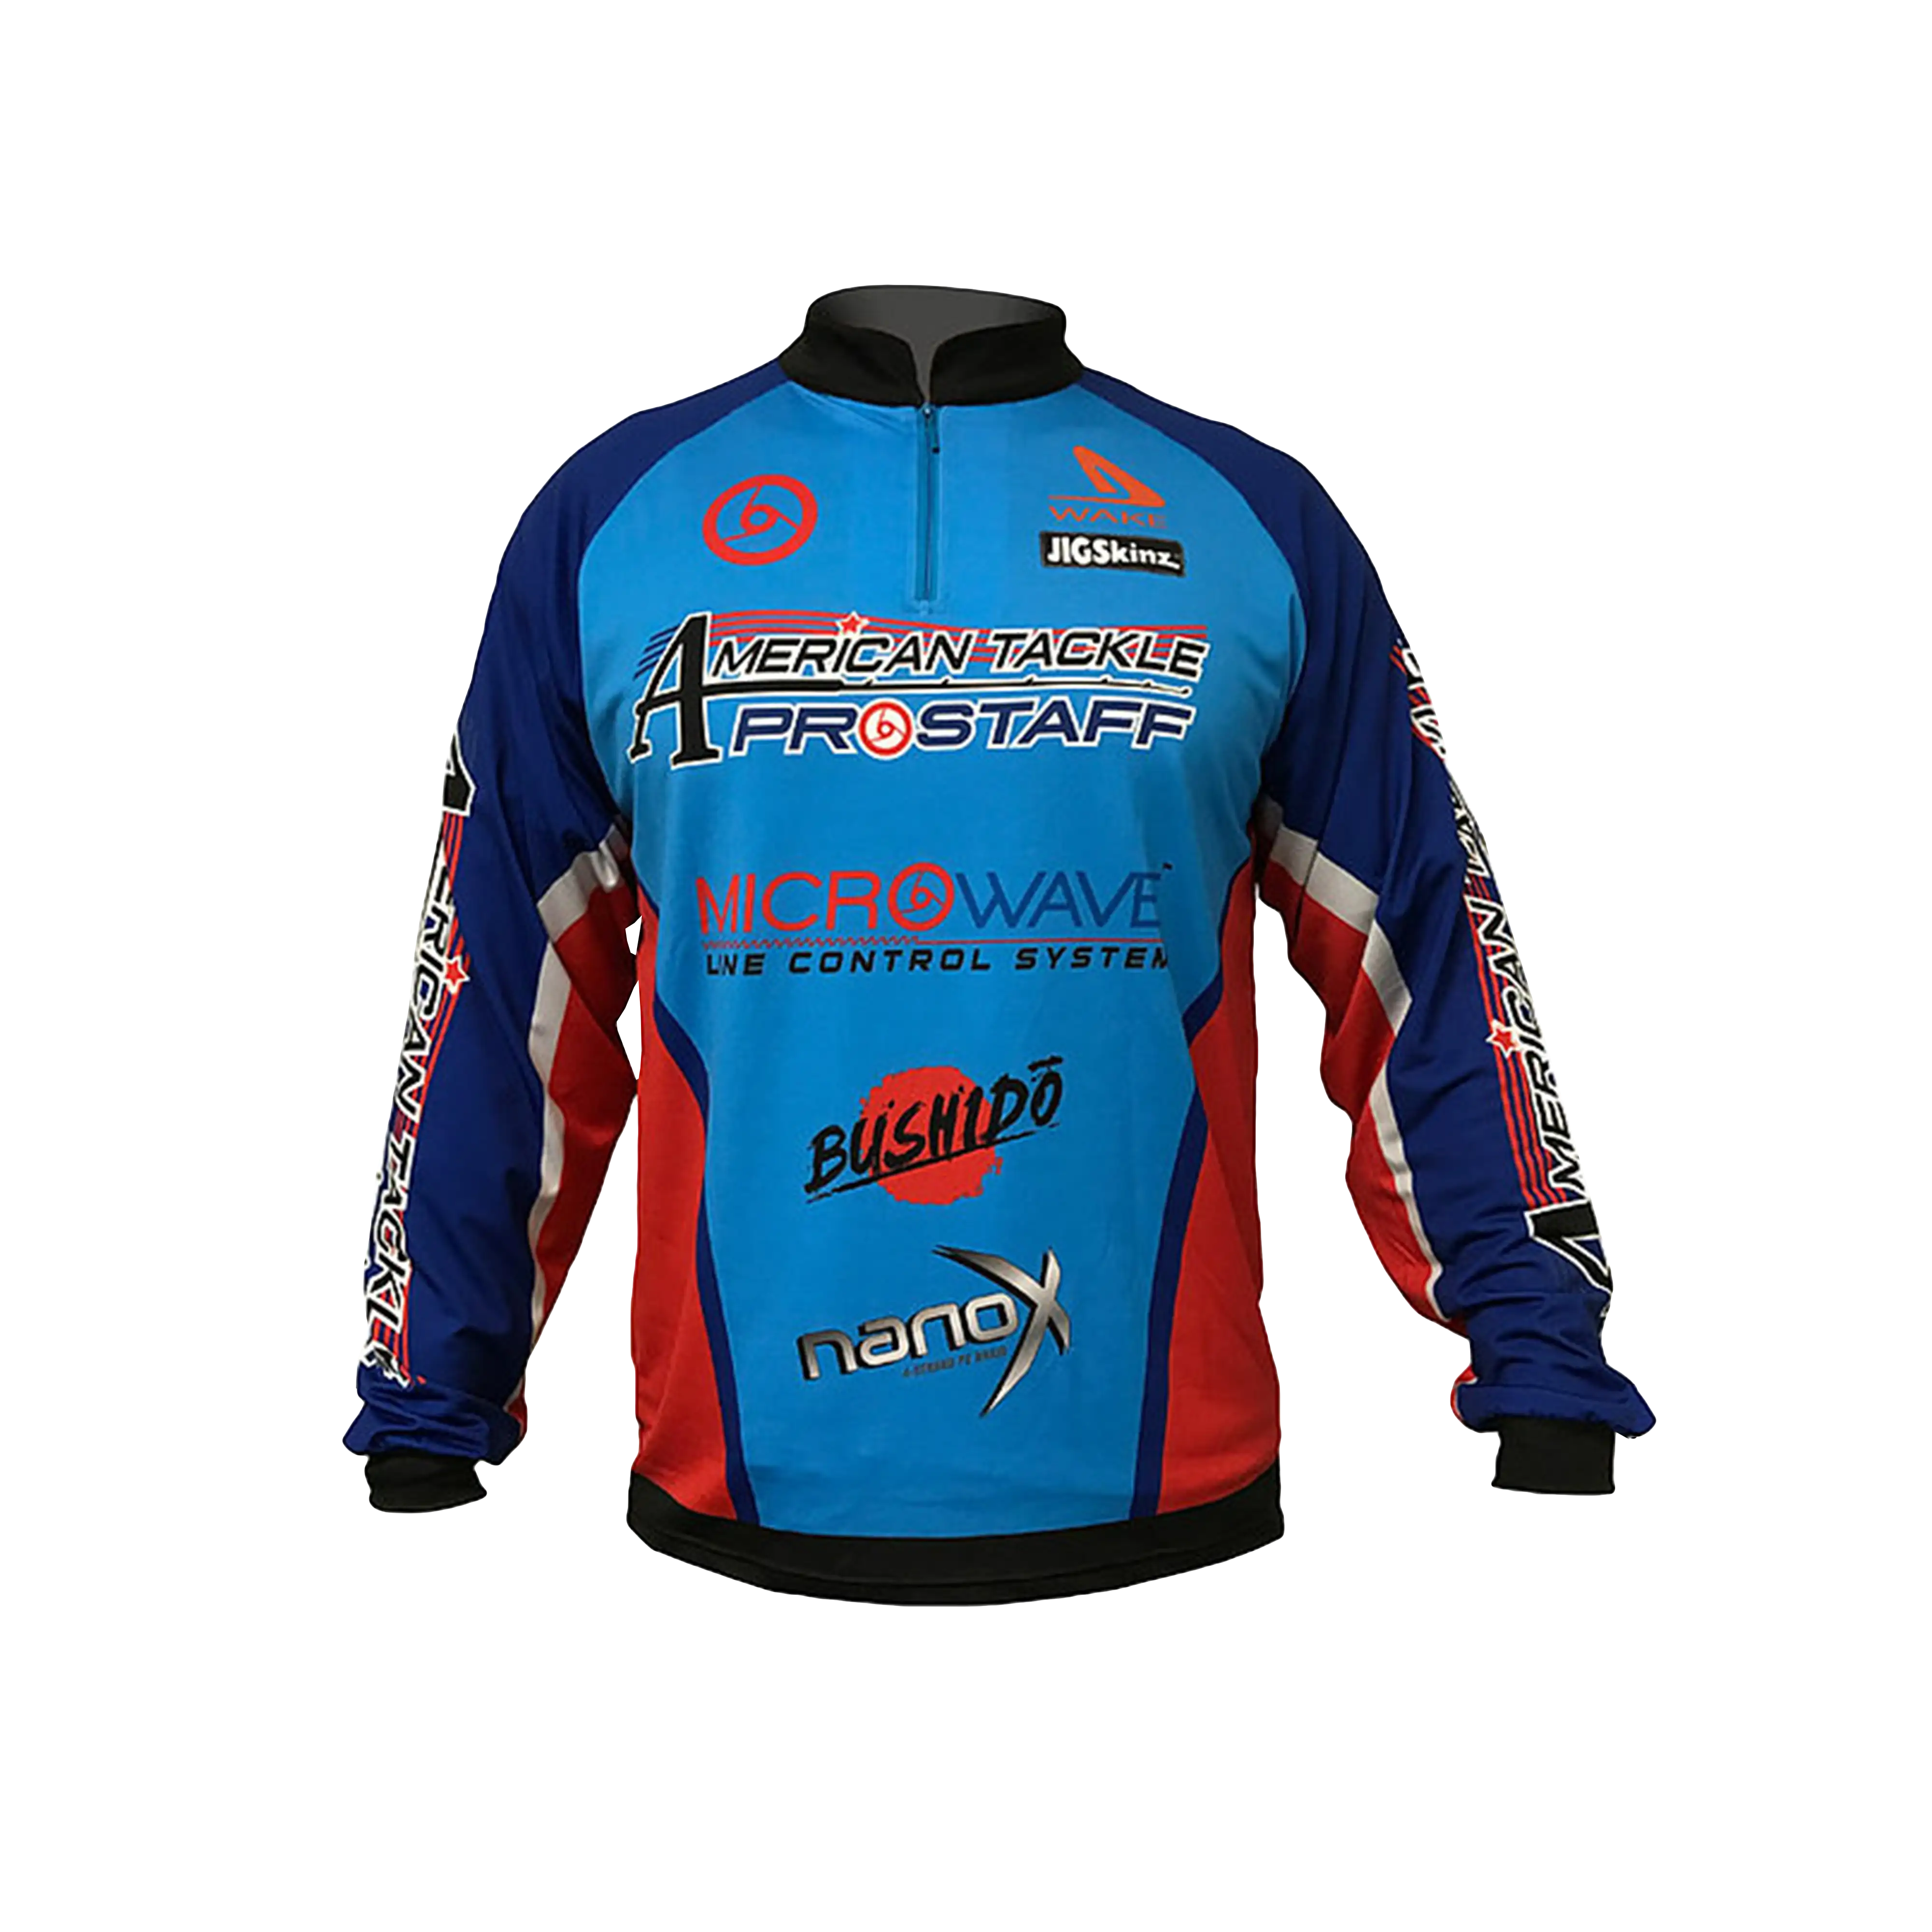 American Tackle ProStaff Jersey - Red, White & Blue, X-Large